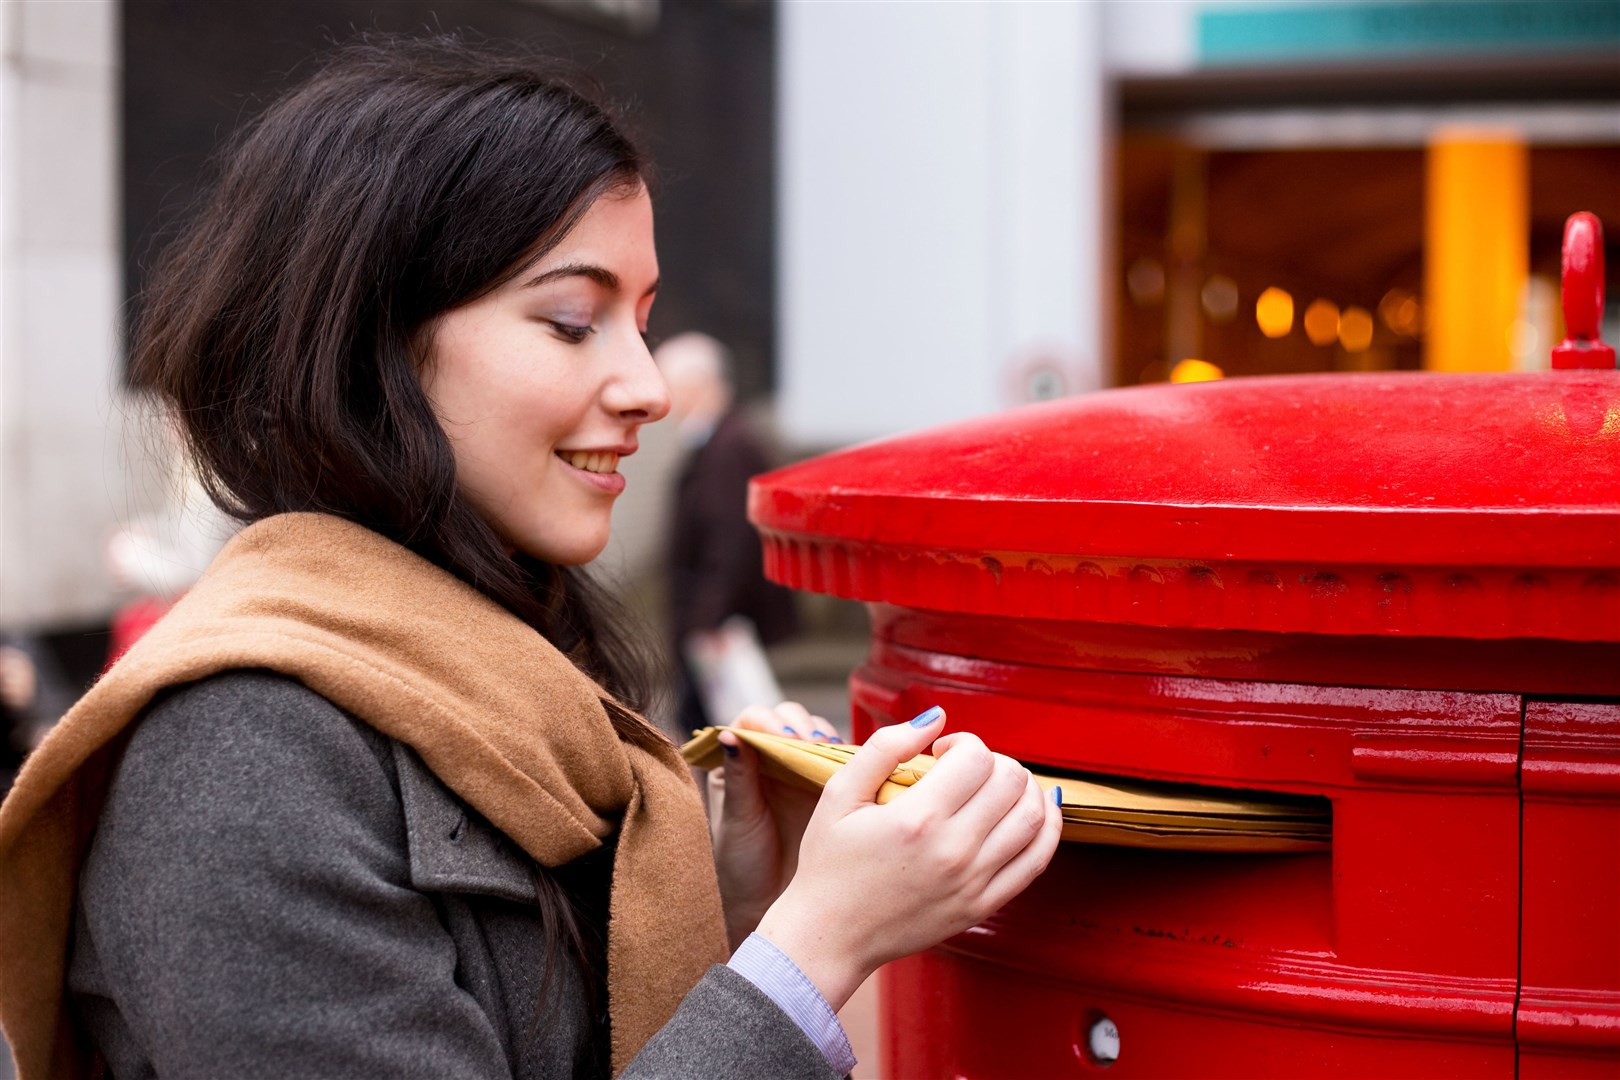 There have been reports of mail being significantly delayed at times. Stock image.